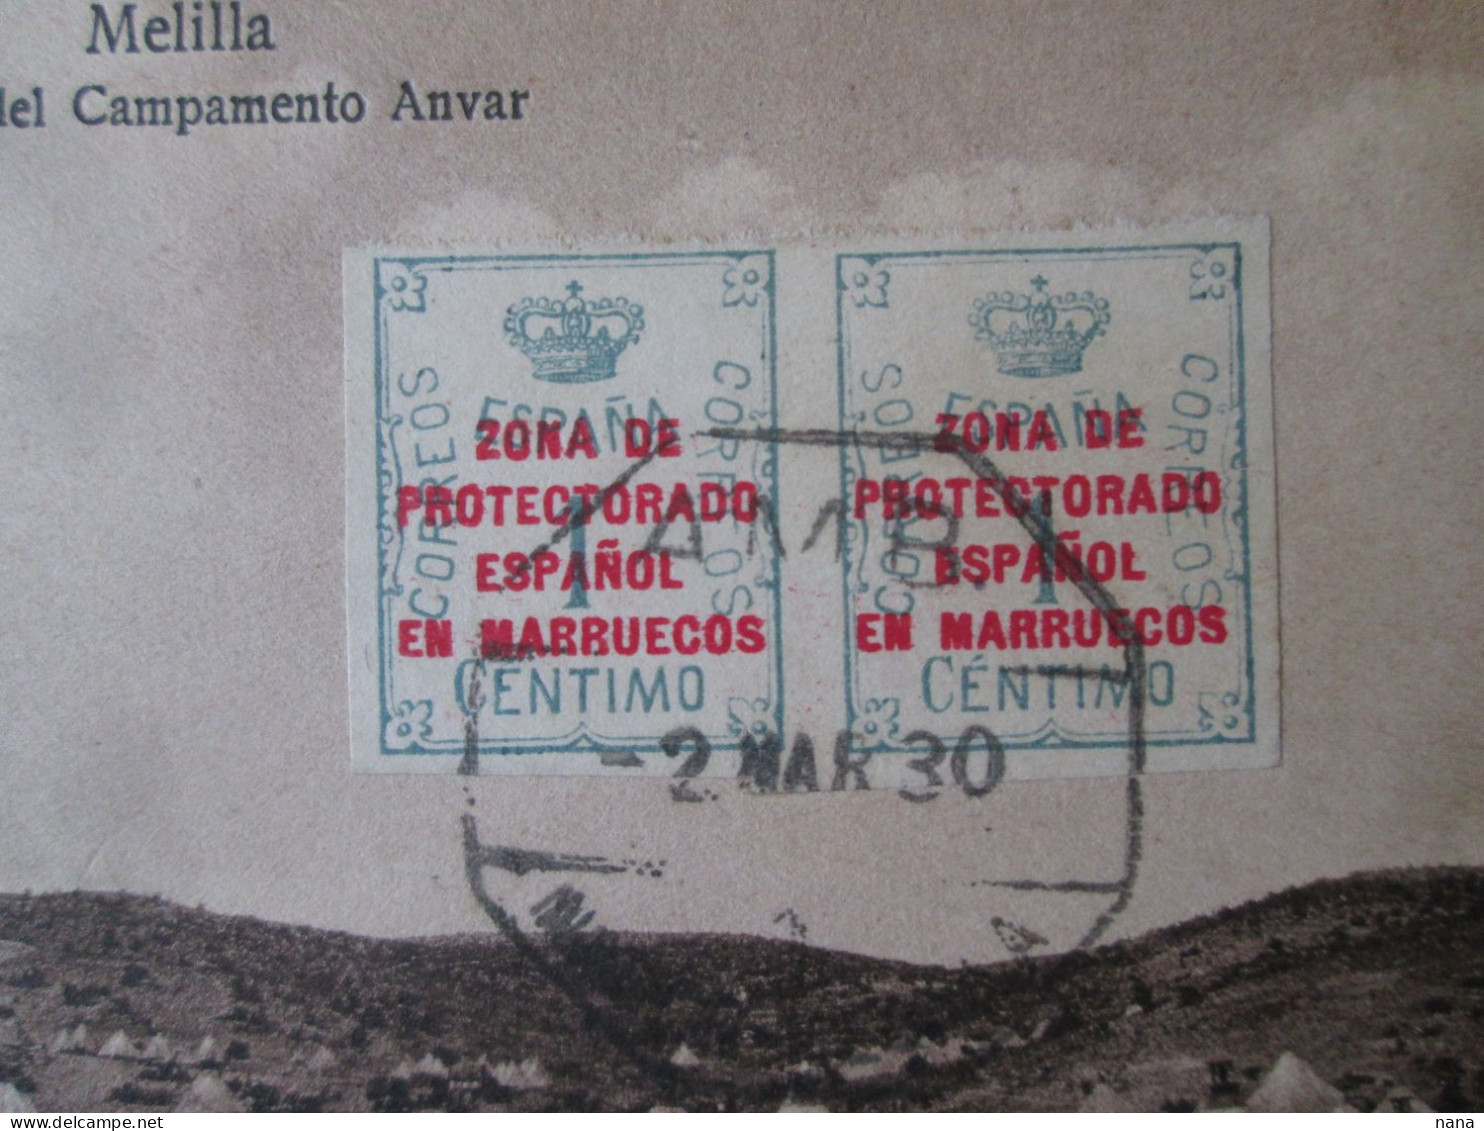 Rare! Spain/Melilla:View Of Anvar Camp With Rare Stamps From 1930:Spanish Protectorate Zone In Morocco,unused Poscard - Melilla